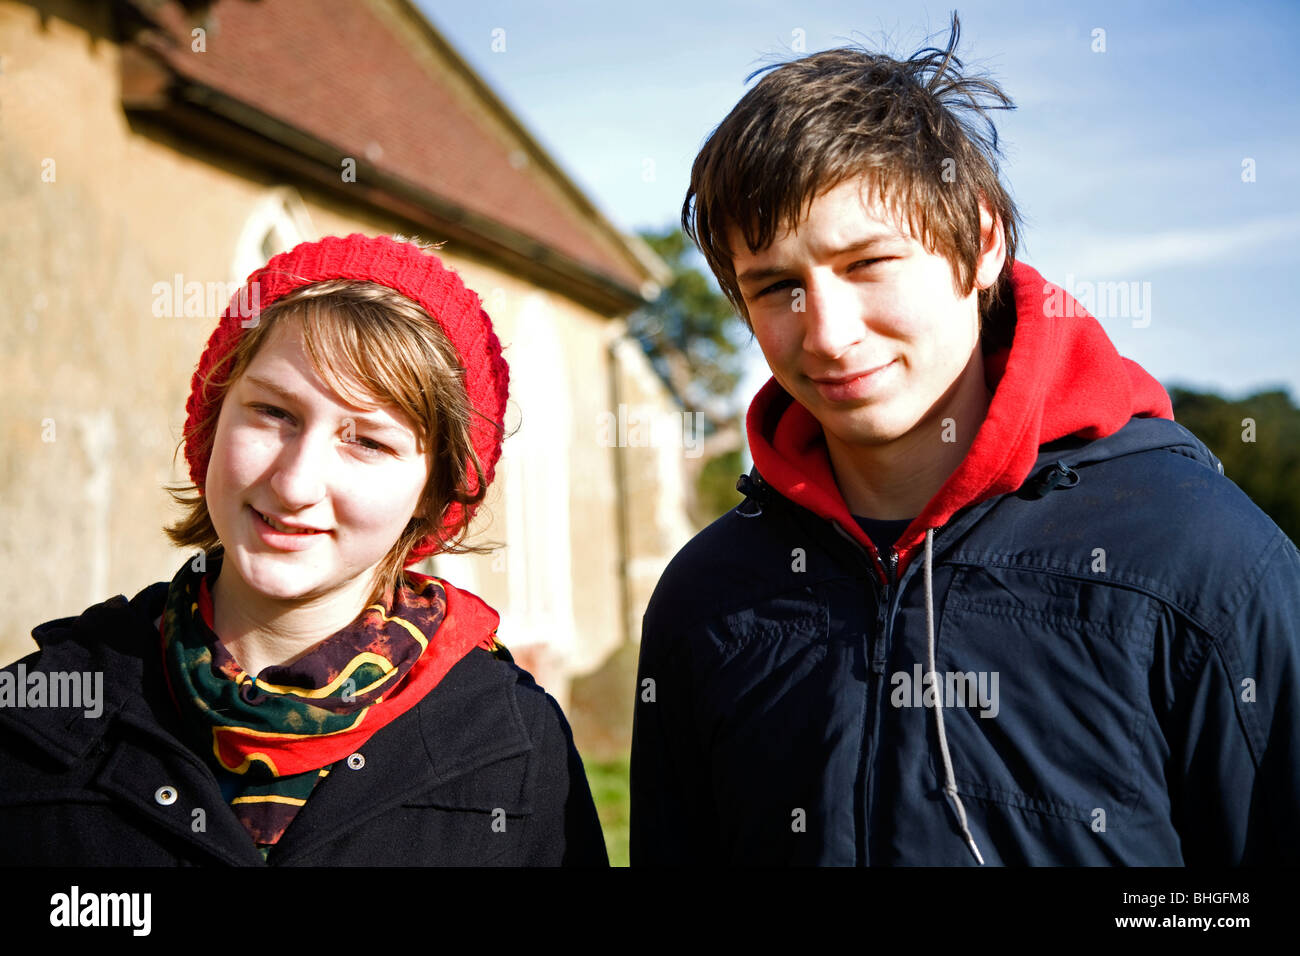 Male and female teenage twins outdoors in winter clothing Stock Photo